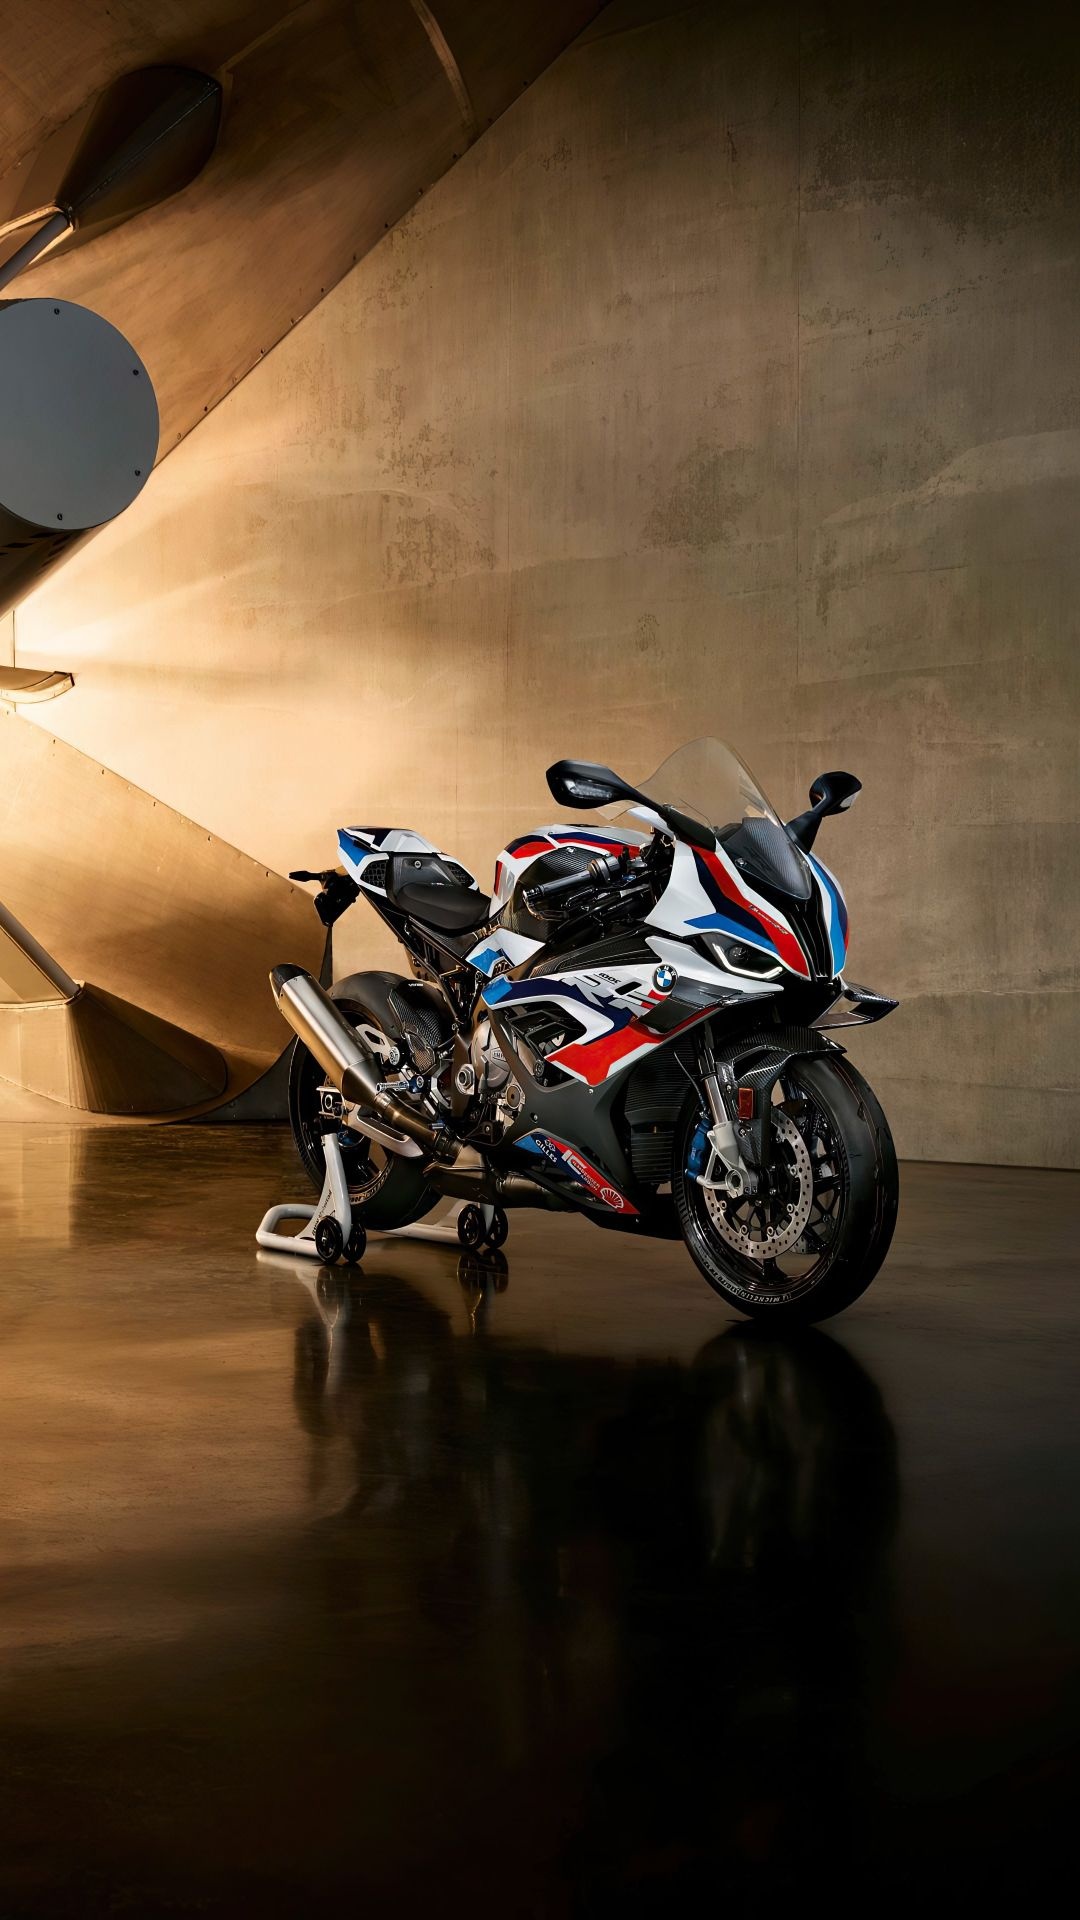 BMW M 1000 RR, Top 25 wallpapers, Best backgrounds download, High-performance bike, 1080x1920 Full HD Phone